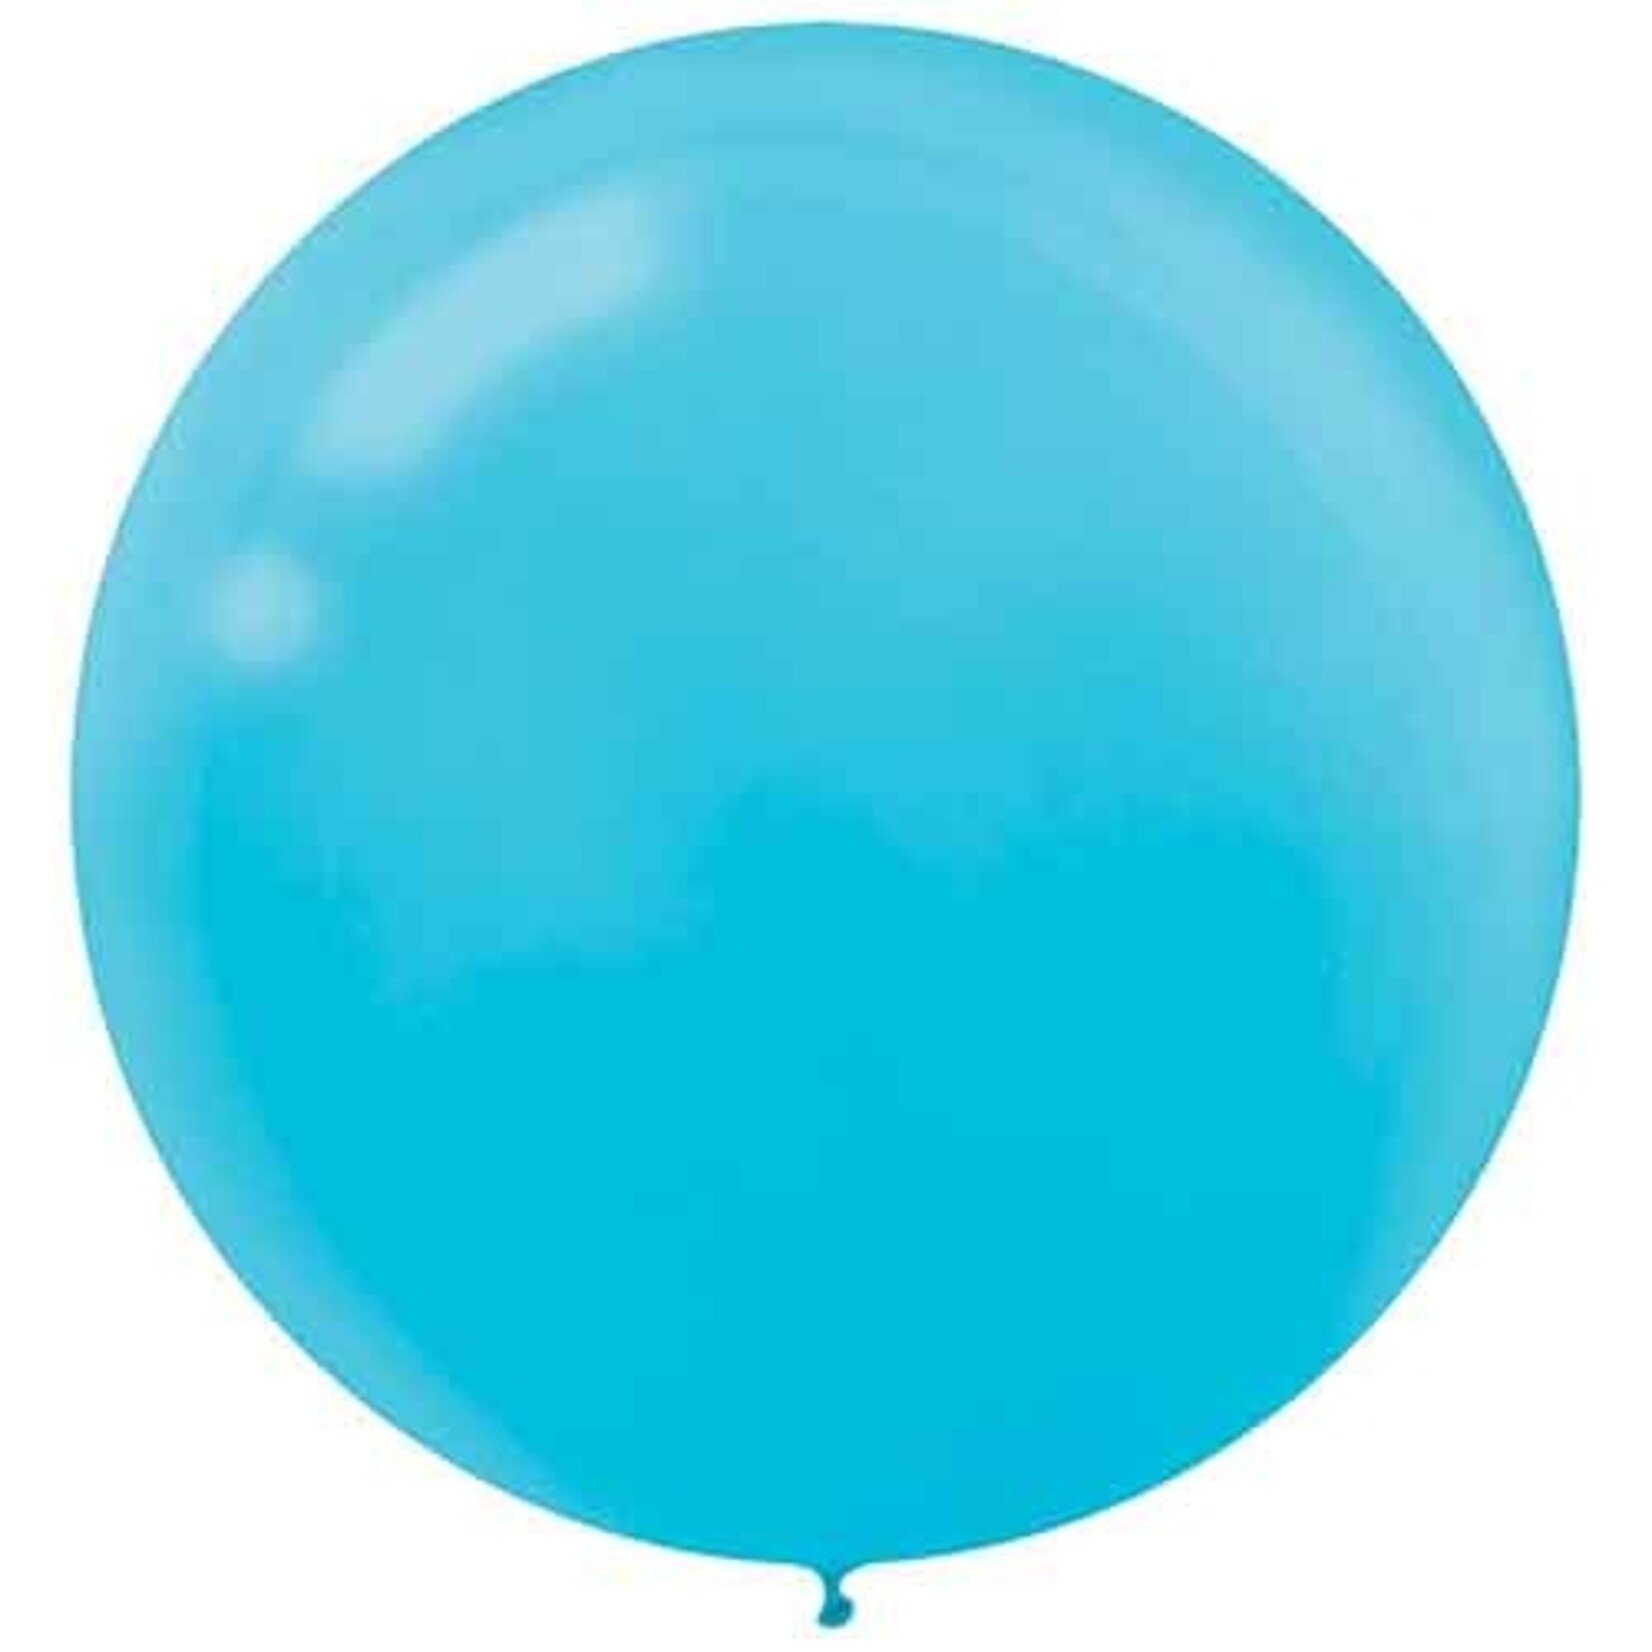 Amscan 24" Caribbean Blue Latex Balloons - 4ct. (Helium Not Included)